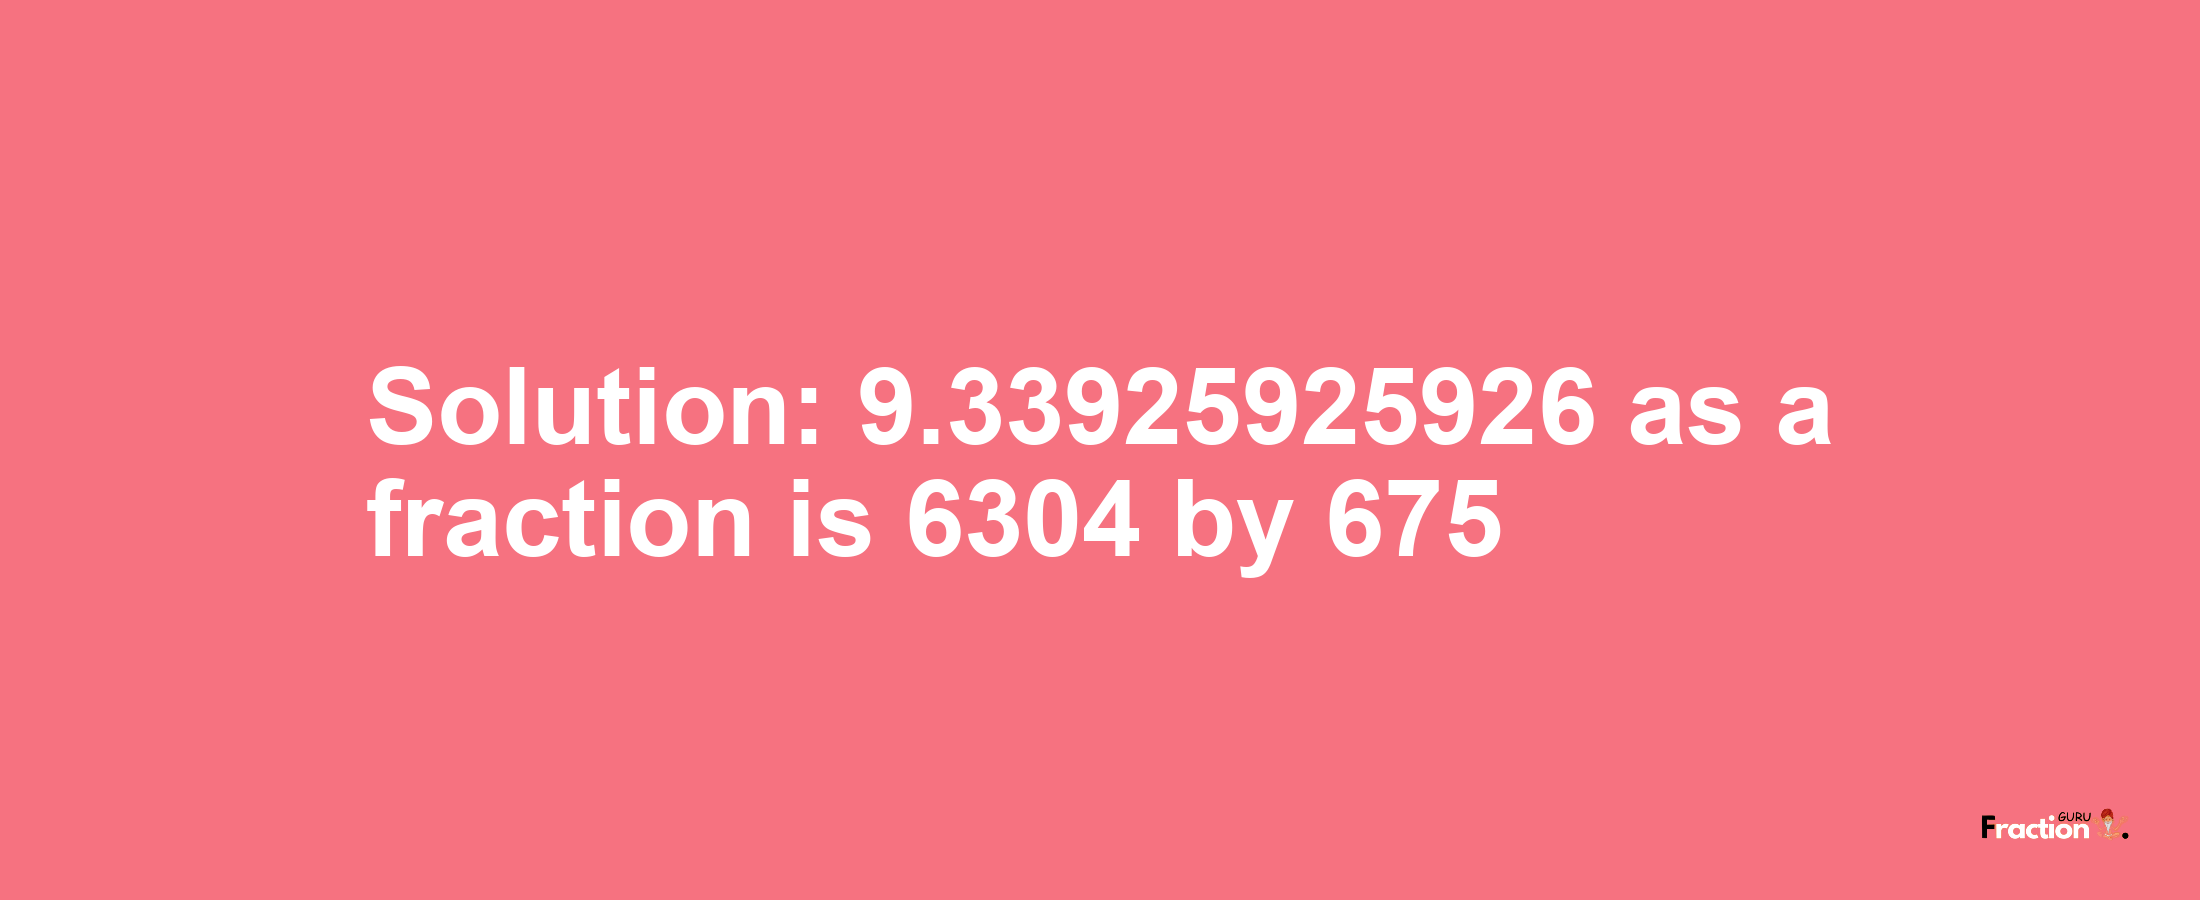 Solution:9.33925925926 as a fraction is 6304/675